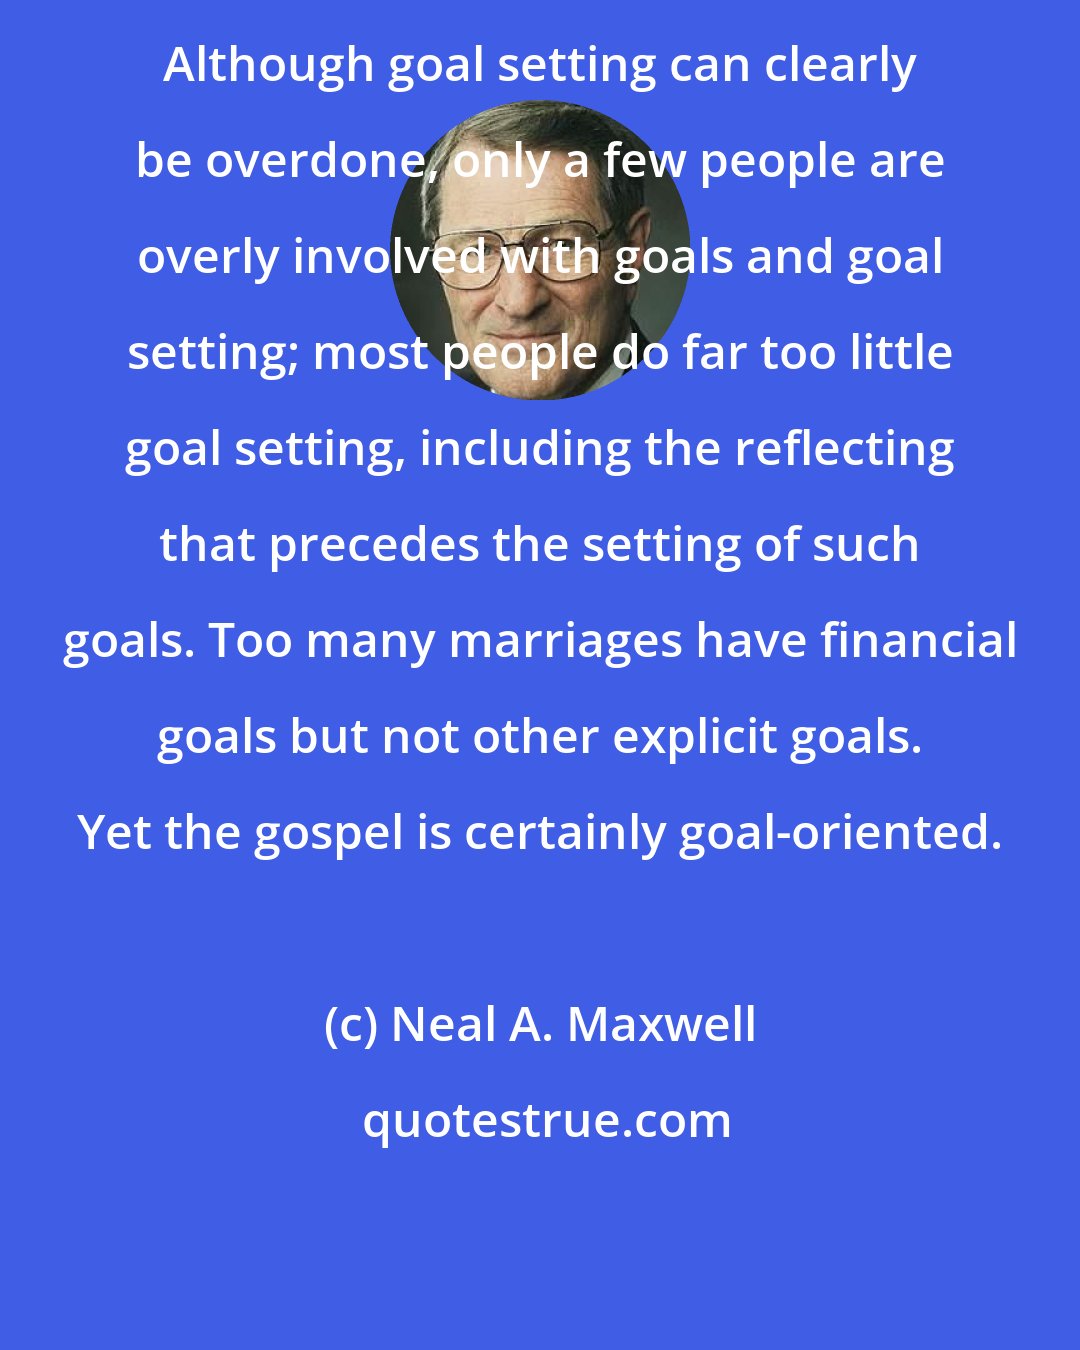 Neal A. Maxwell: Although goal setting can clearly be overdone, only a few people are overly involved with goals and goal setting; most people do far too little goal setting, including the reflecting that precedes the setting of such goals. Too many marriages have financial goals but not other explicit goals. Yet the gospel is certainly goal-oriented.